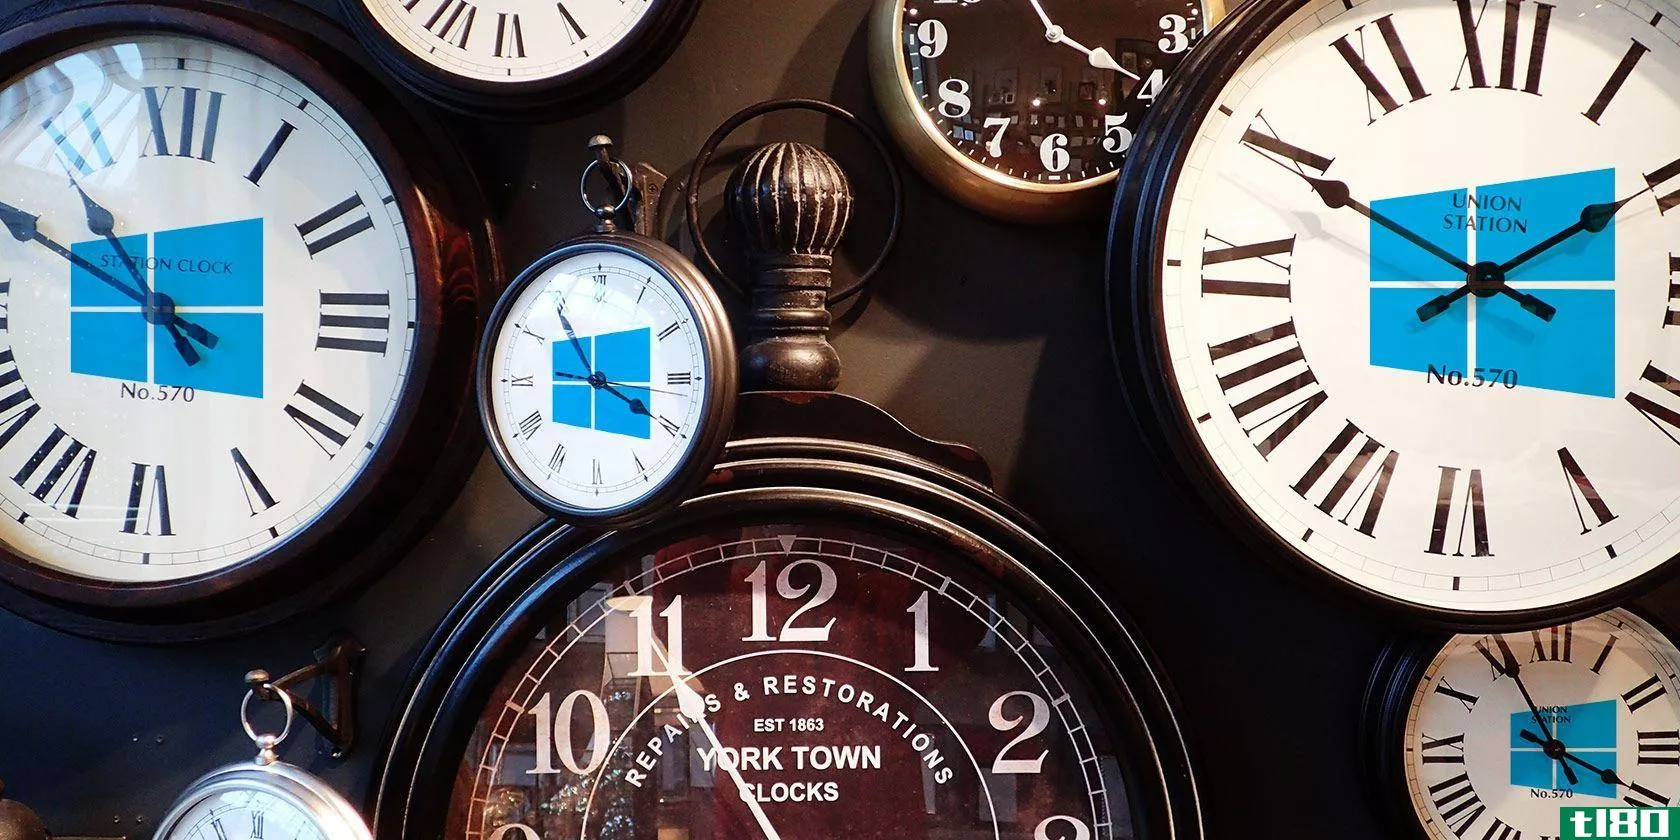 Your Windows 10 time is wrong? We show you how to fix the Windows clock to maintain the correct time.